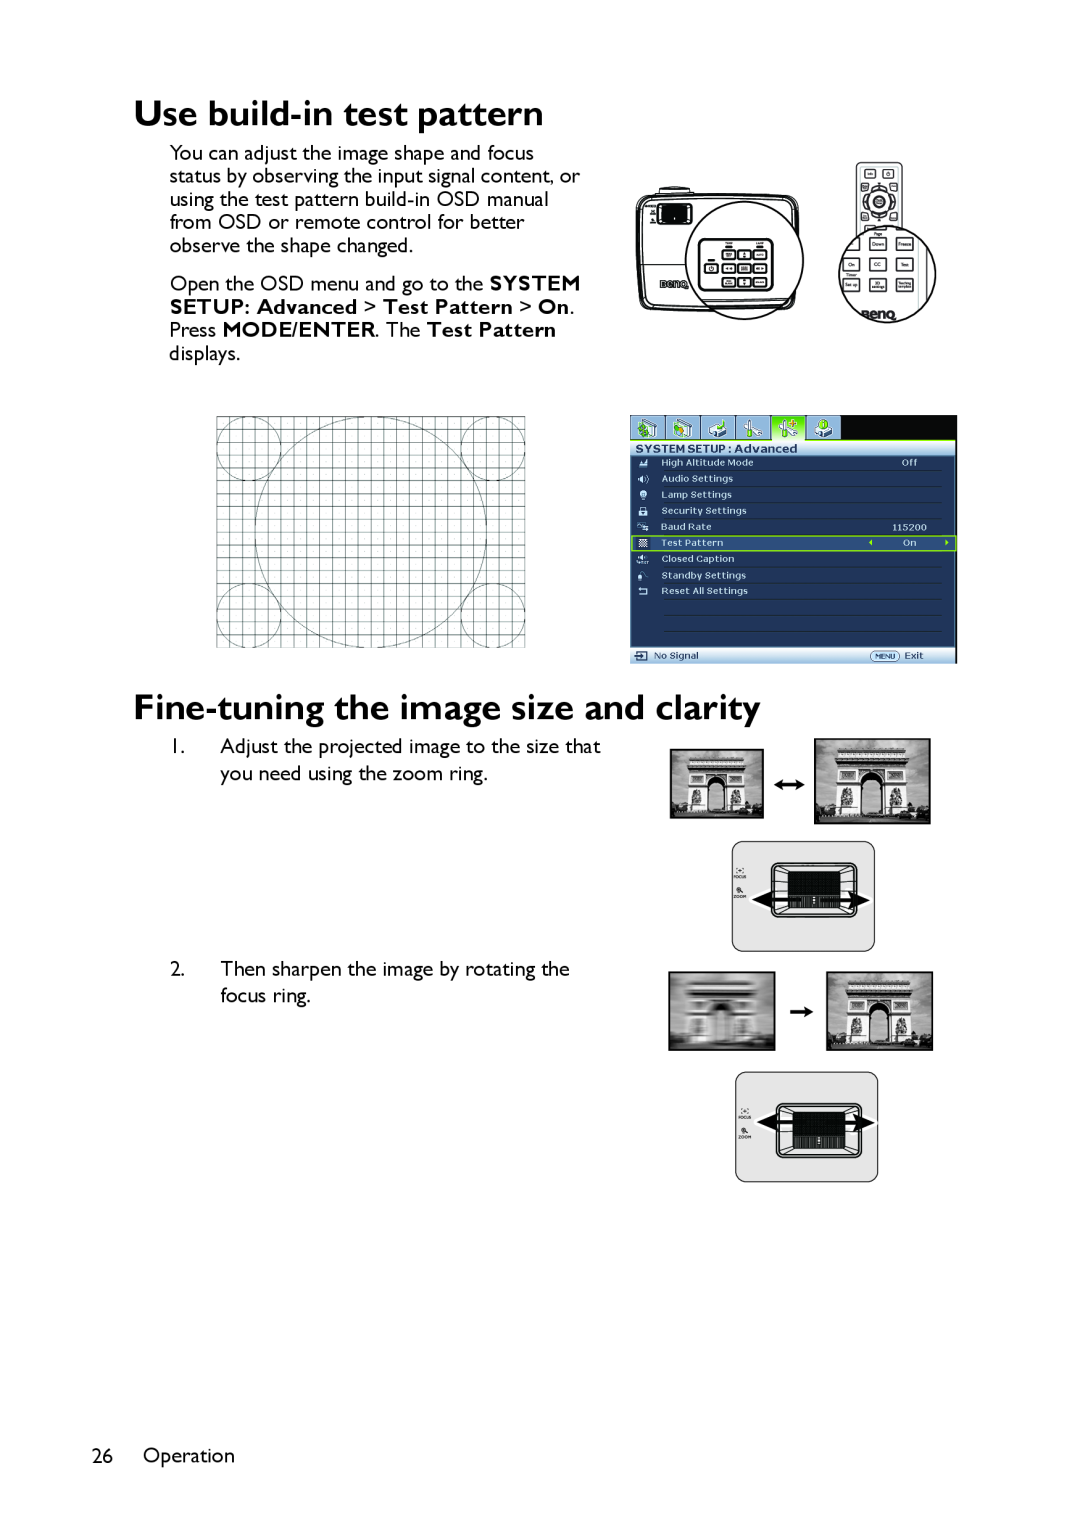 BenQ MS517 user manual Use build-in test pattern, Fine-tuning the image size and clarity 